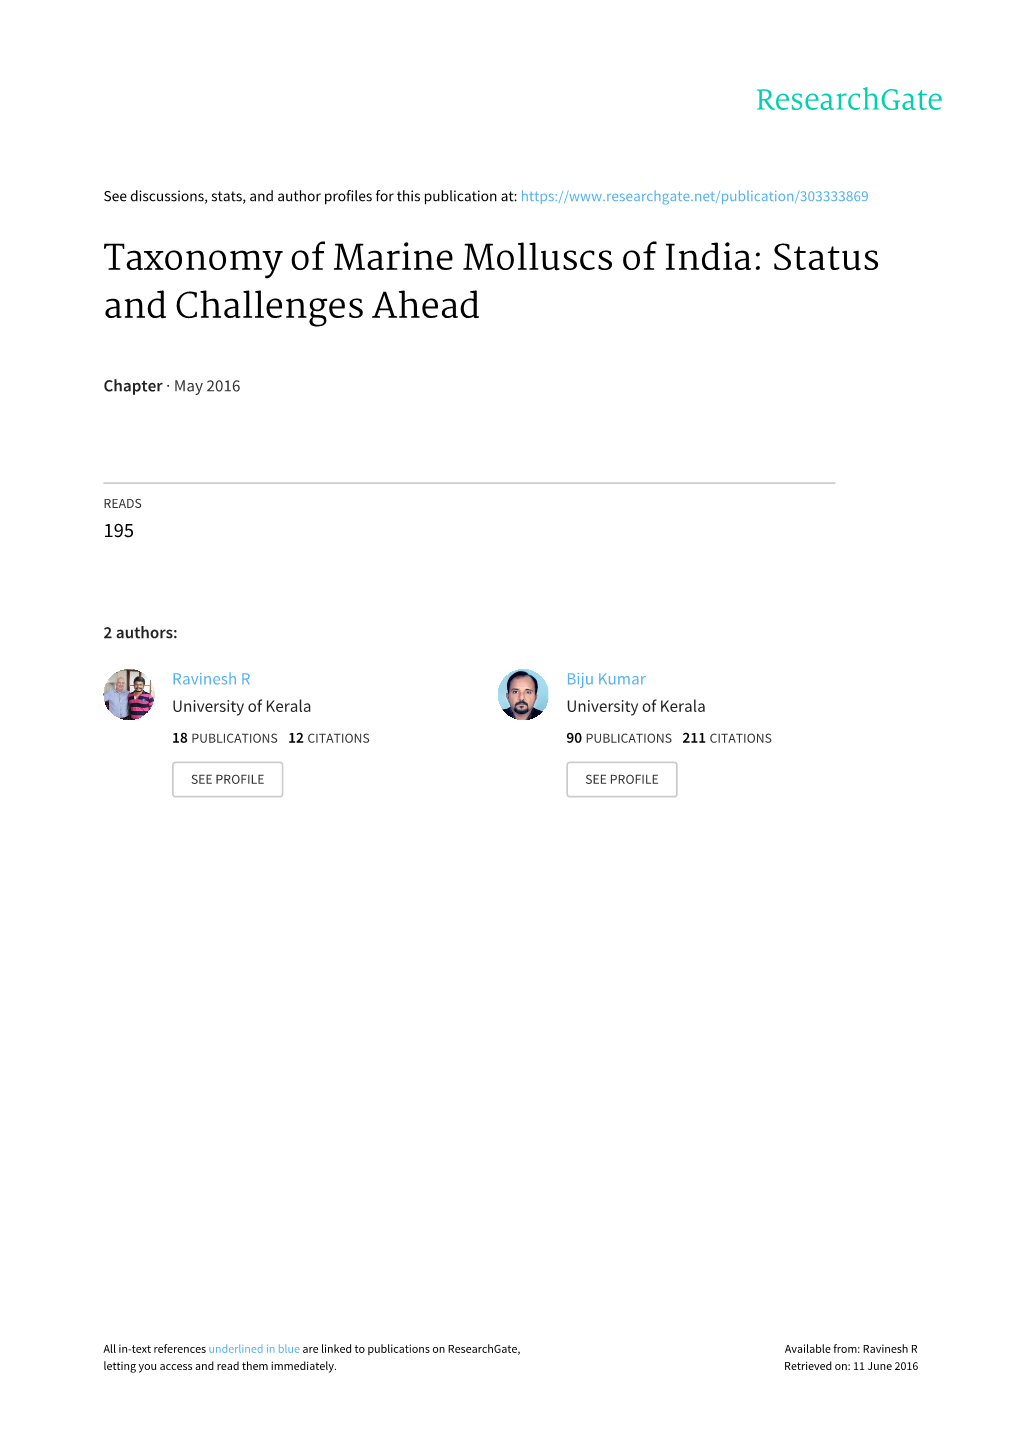 Taxonomy of Marine Molluscs of India: Status and Challenges Ahead